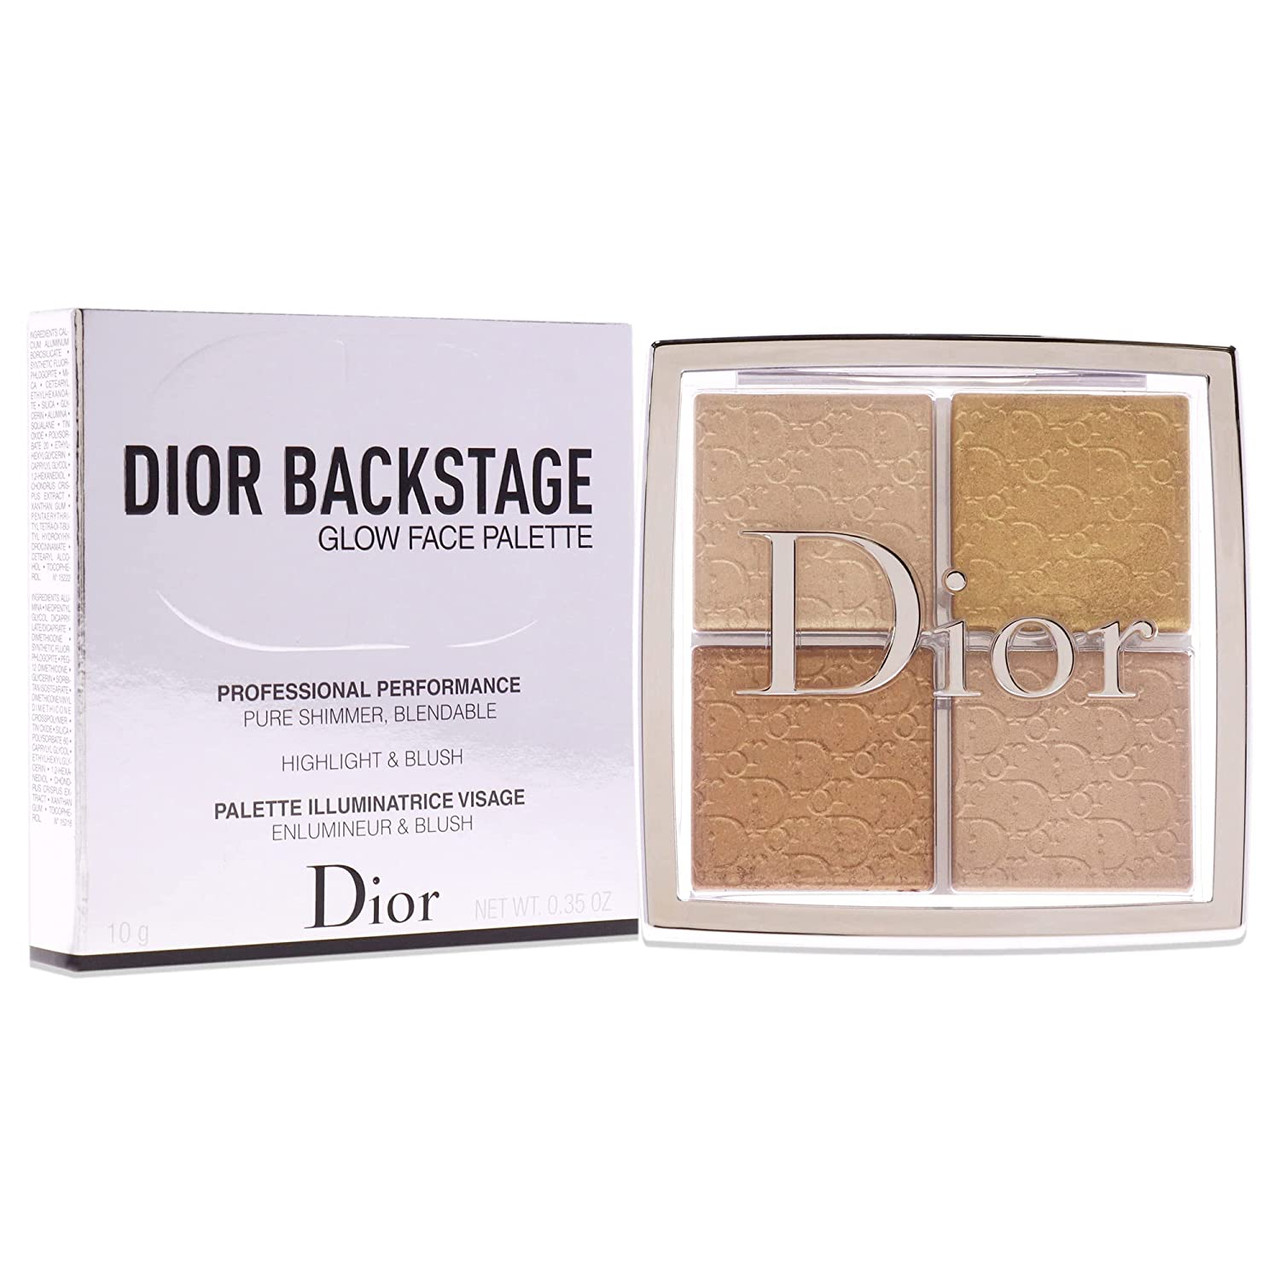 My Top 3 Shades Dior Backstage Eye Palette  Gallery posted by  Febriana P Devi  Lemon8